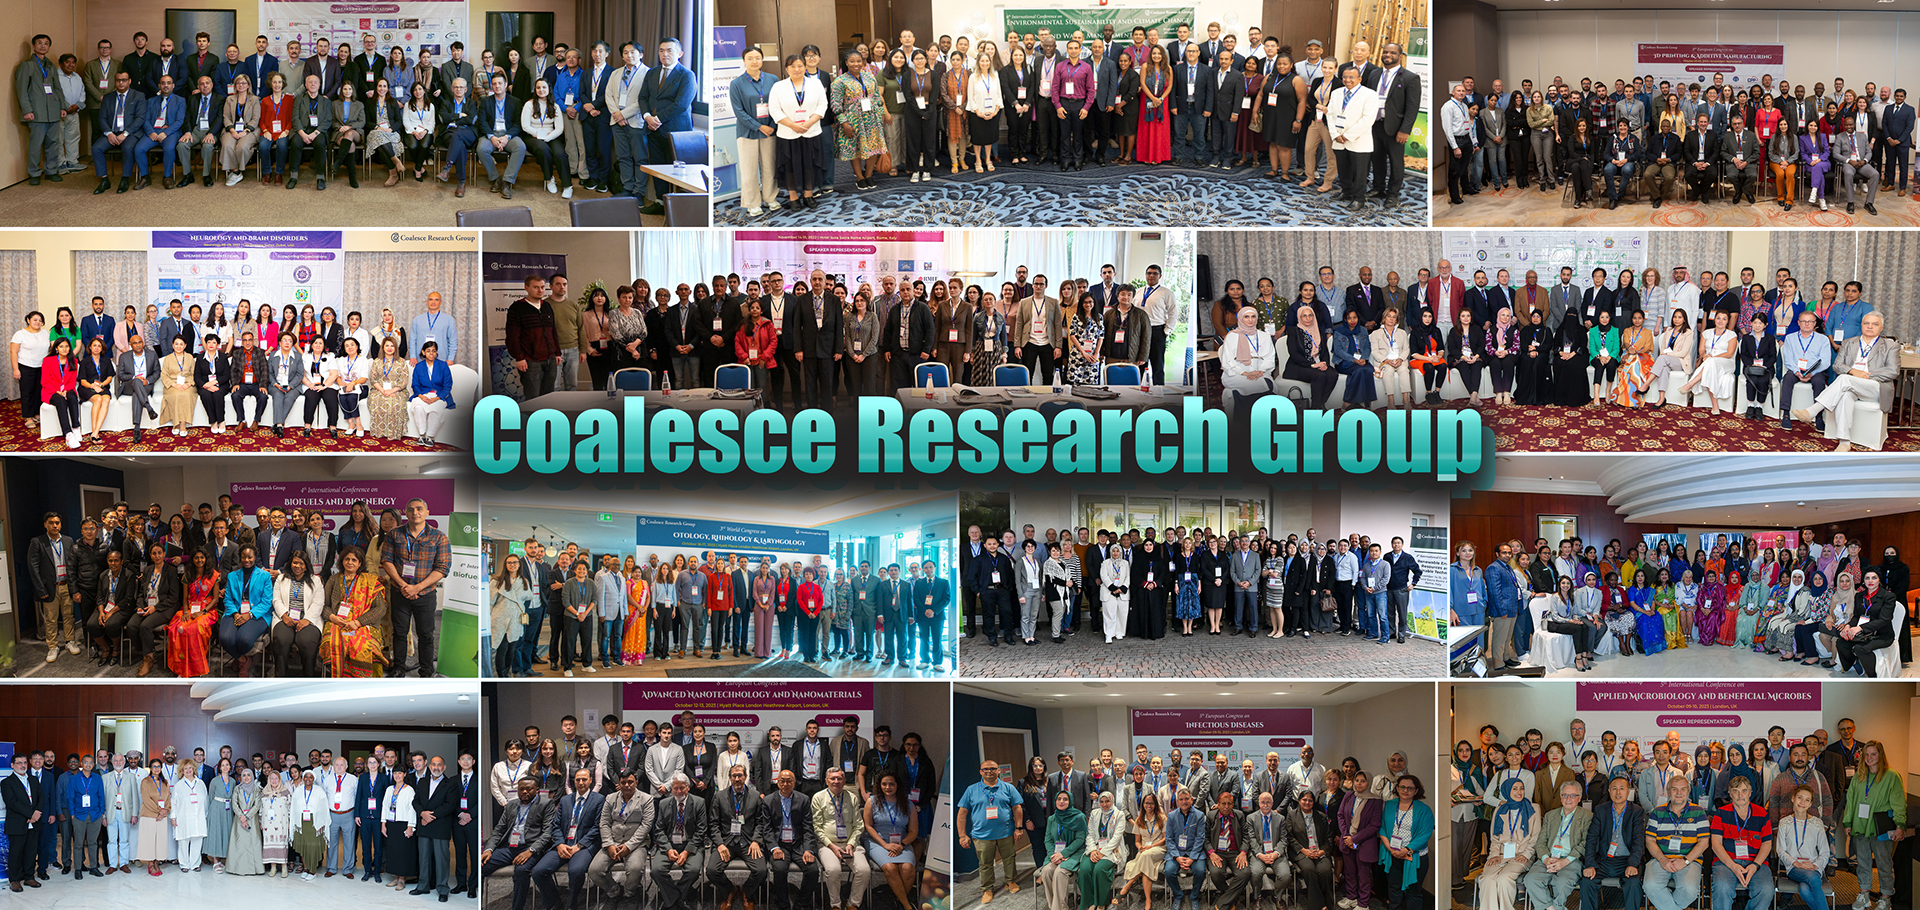 COALESCE RESEARCH GROUP